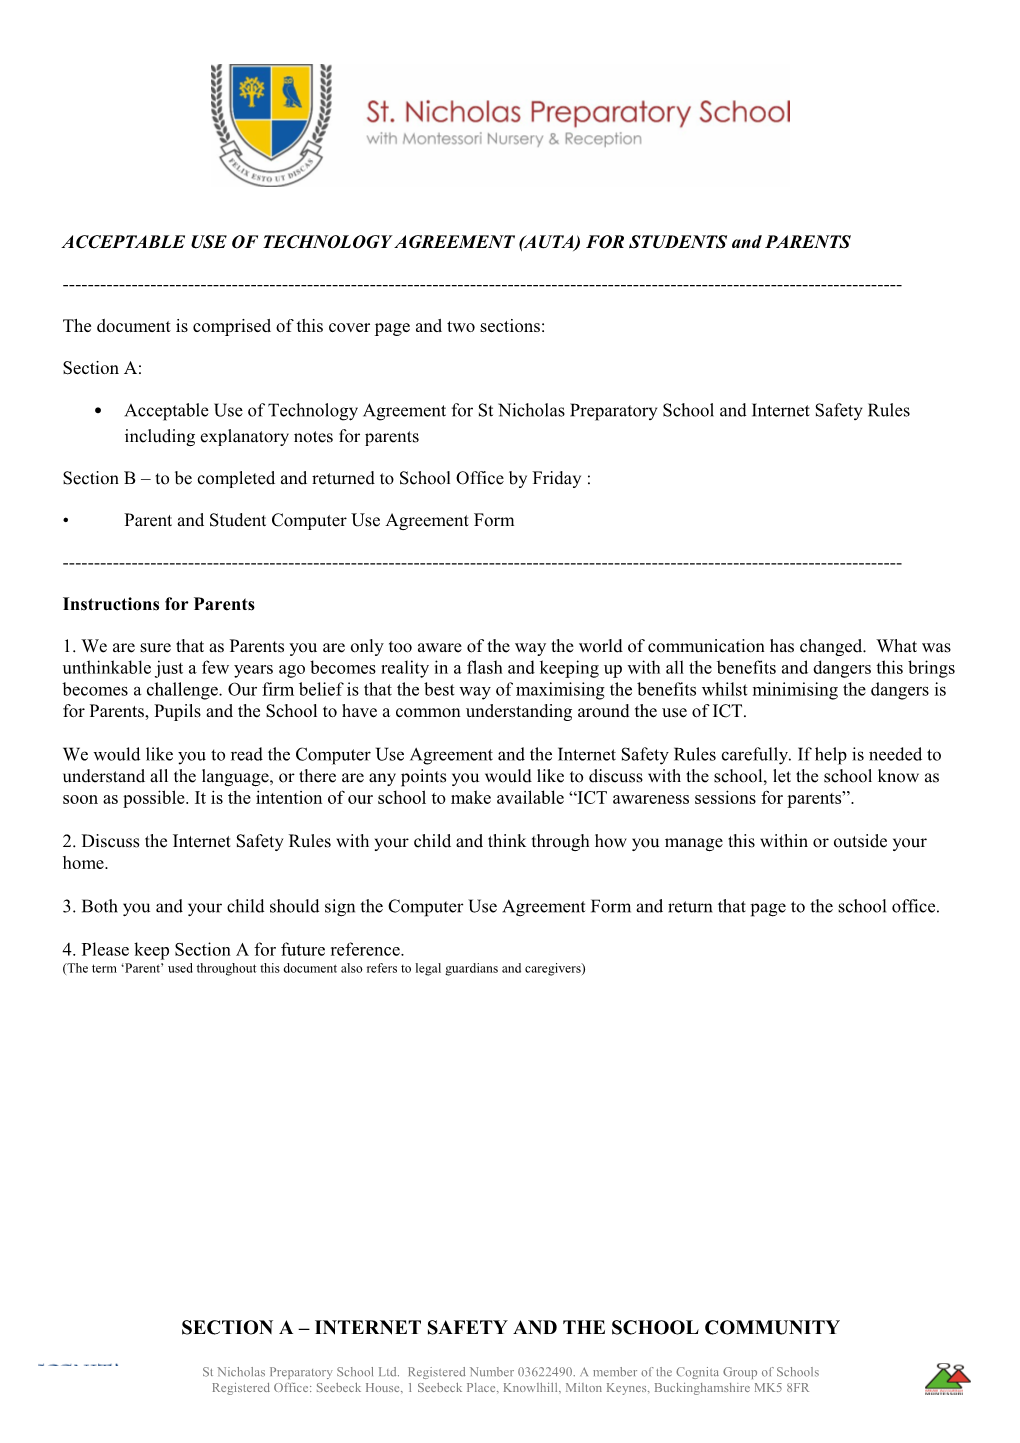 ACCEPTABLE USE of TECHNOLOGY AGREEMENT (AUTA) for STUDENTS and PARENTS